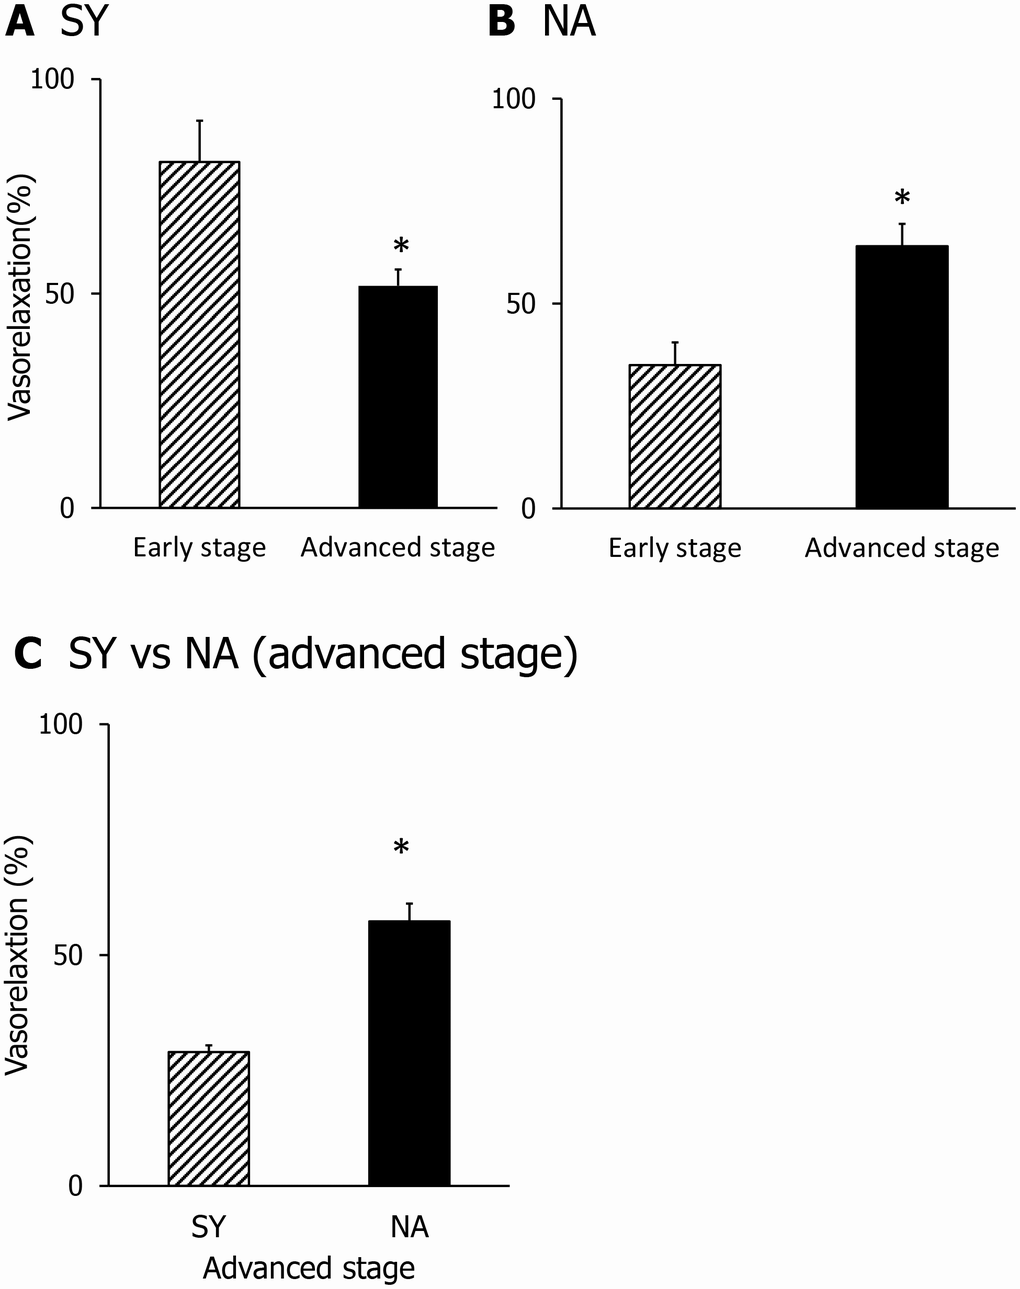 Comparison of the vasorelaxing activity of SY (A) and NA (B) in the early stage or advanced stage. Comparison of SY and NA in the advanced stage (C). Dipeptide was applied at a dose of 1 μM. Values are expressed as the means ± SEM (A, n=3; B, n =4-5; C, n = 3). *P A–B). *P C).